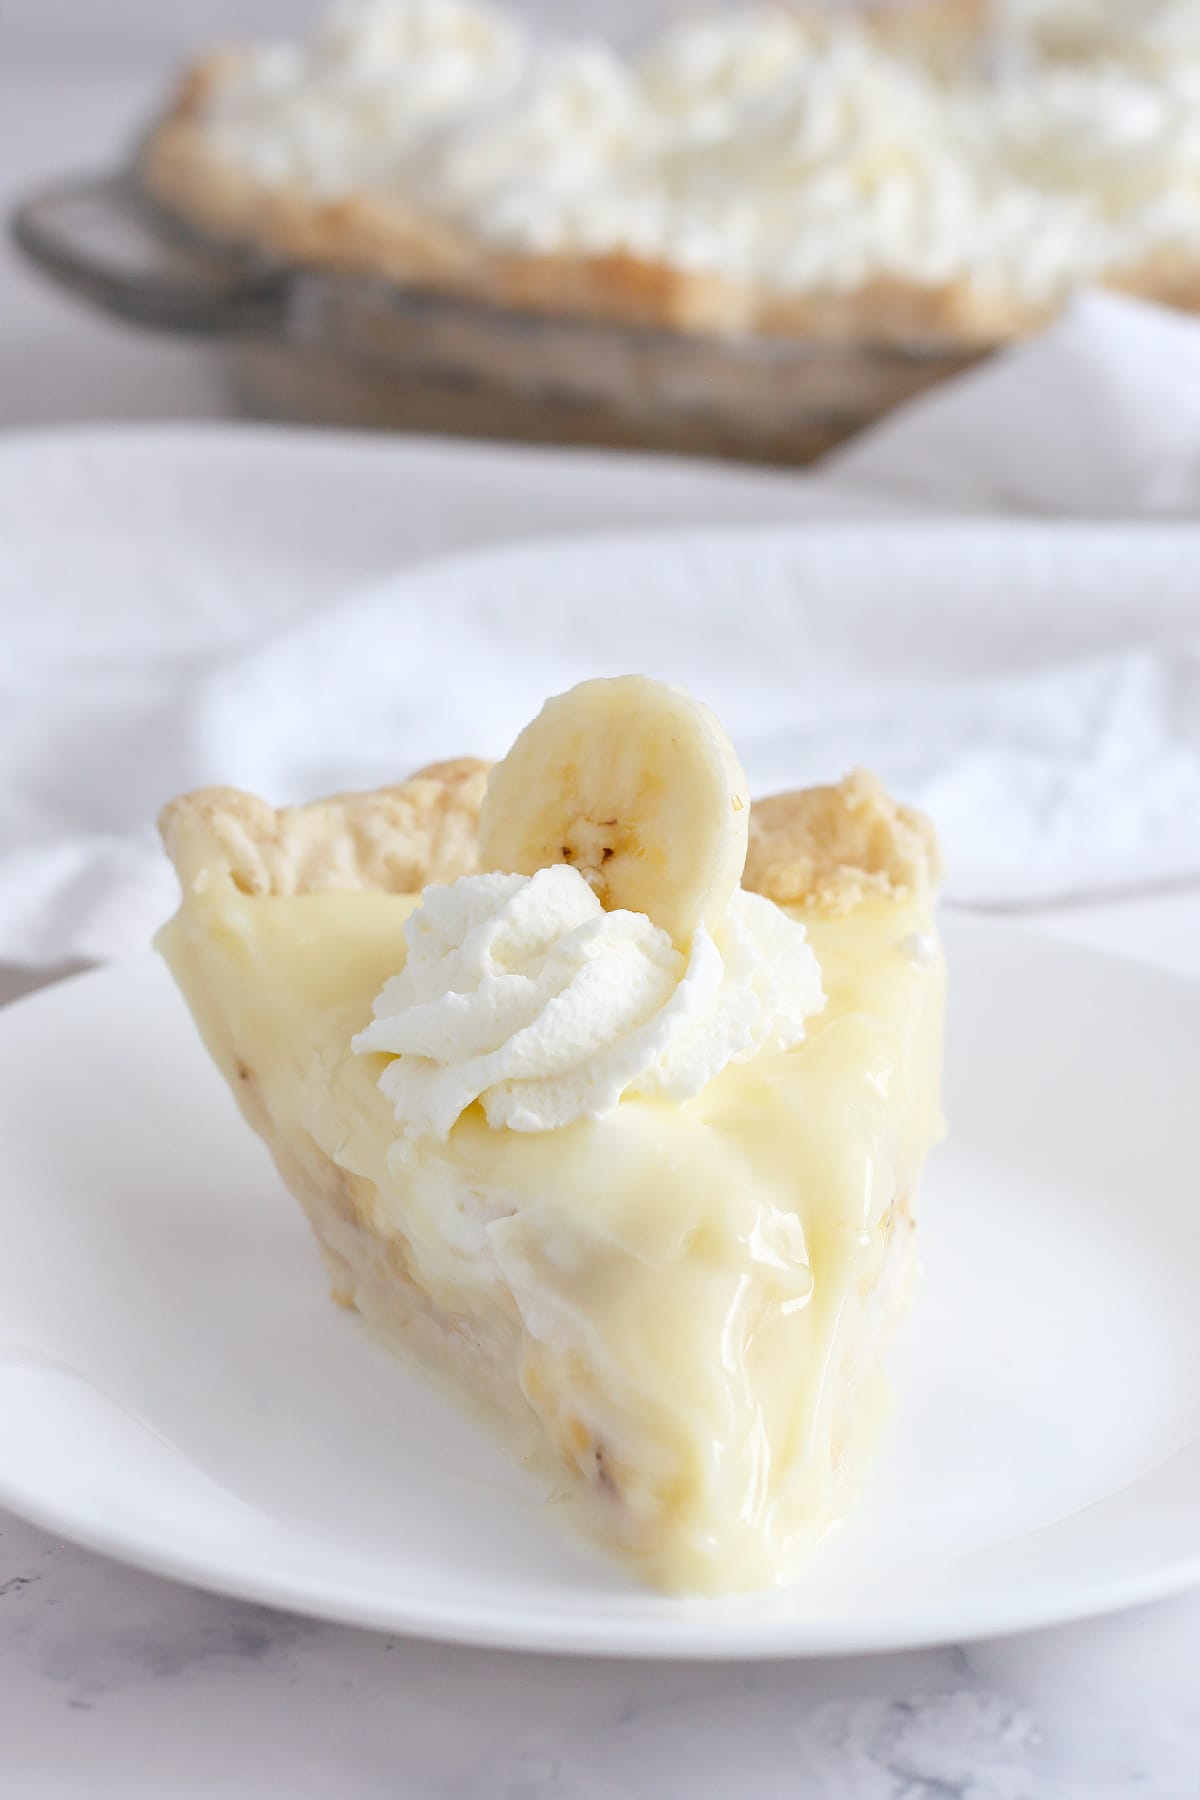 A slice of banana cream pie topped with fresh whipped cream and a slice of banana on a white serving plate.